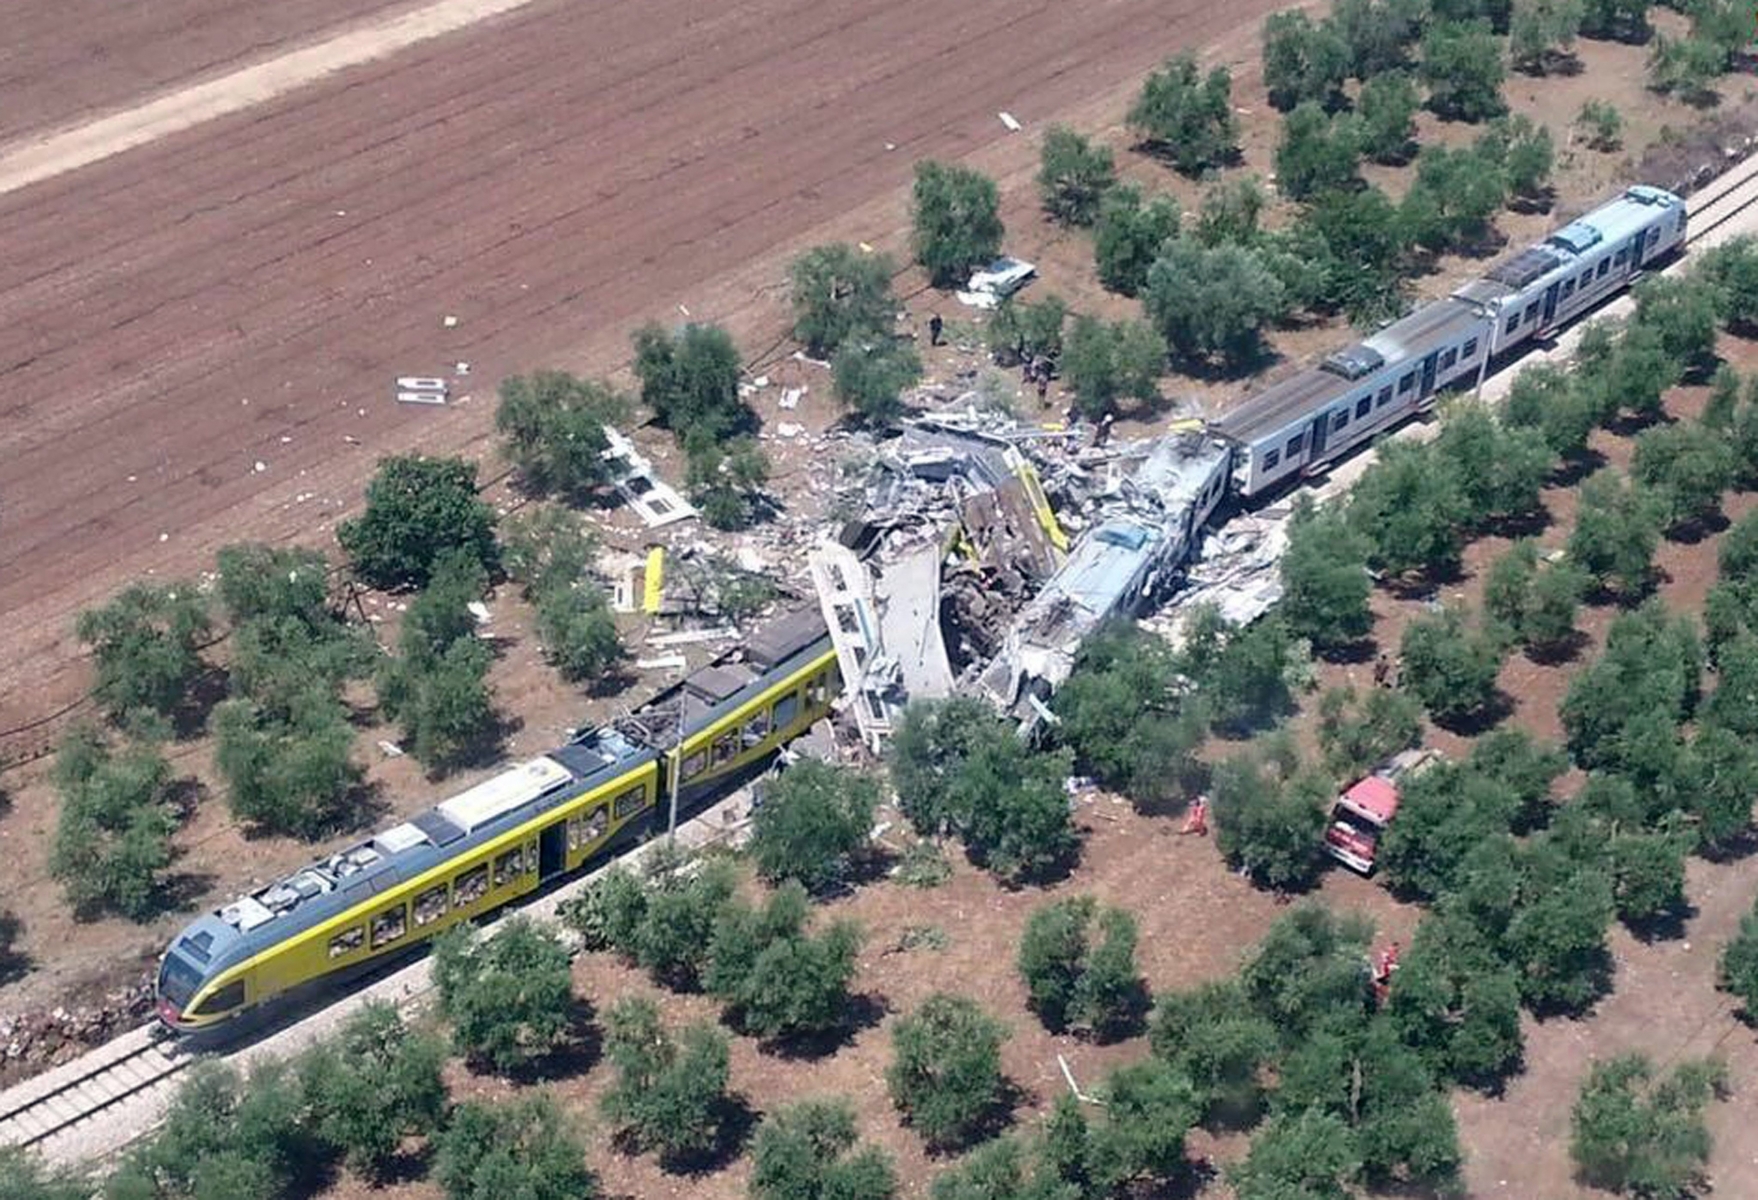 epa05421608 A handout picture provided by the Italian Fire Brigade on 12 July 2016 shows the crash site where two trains collided on a single-track stretch between Ruvo di Puglia and Corato, southern Italy, 12 July 2016. A least ten people have been killed and dozens injured according to reports.  EPA/ITALIAN FIRE BRIGADE / HANDOUT  HANDOUT EDITORIAL USE ONLY/NO SALES HANDOUT EDITORIAL USE ONLY/NO SALES ITALY TRAIN CRASH